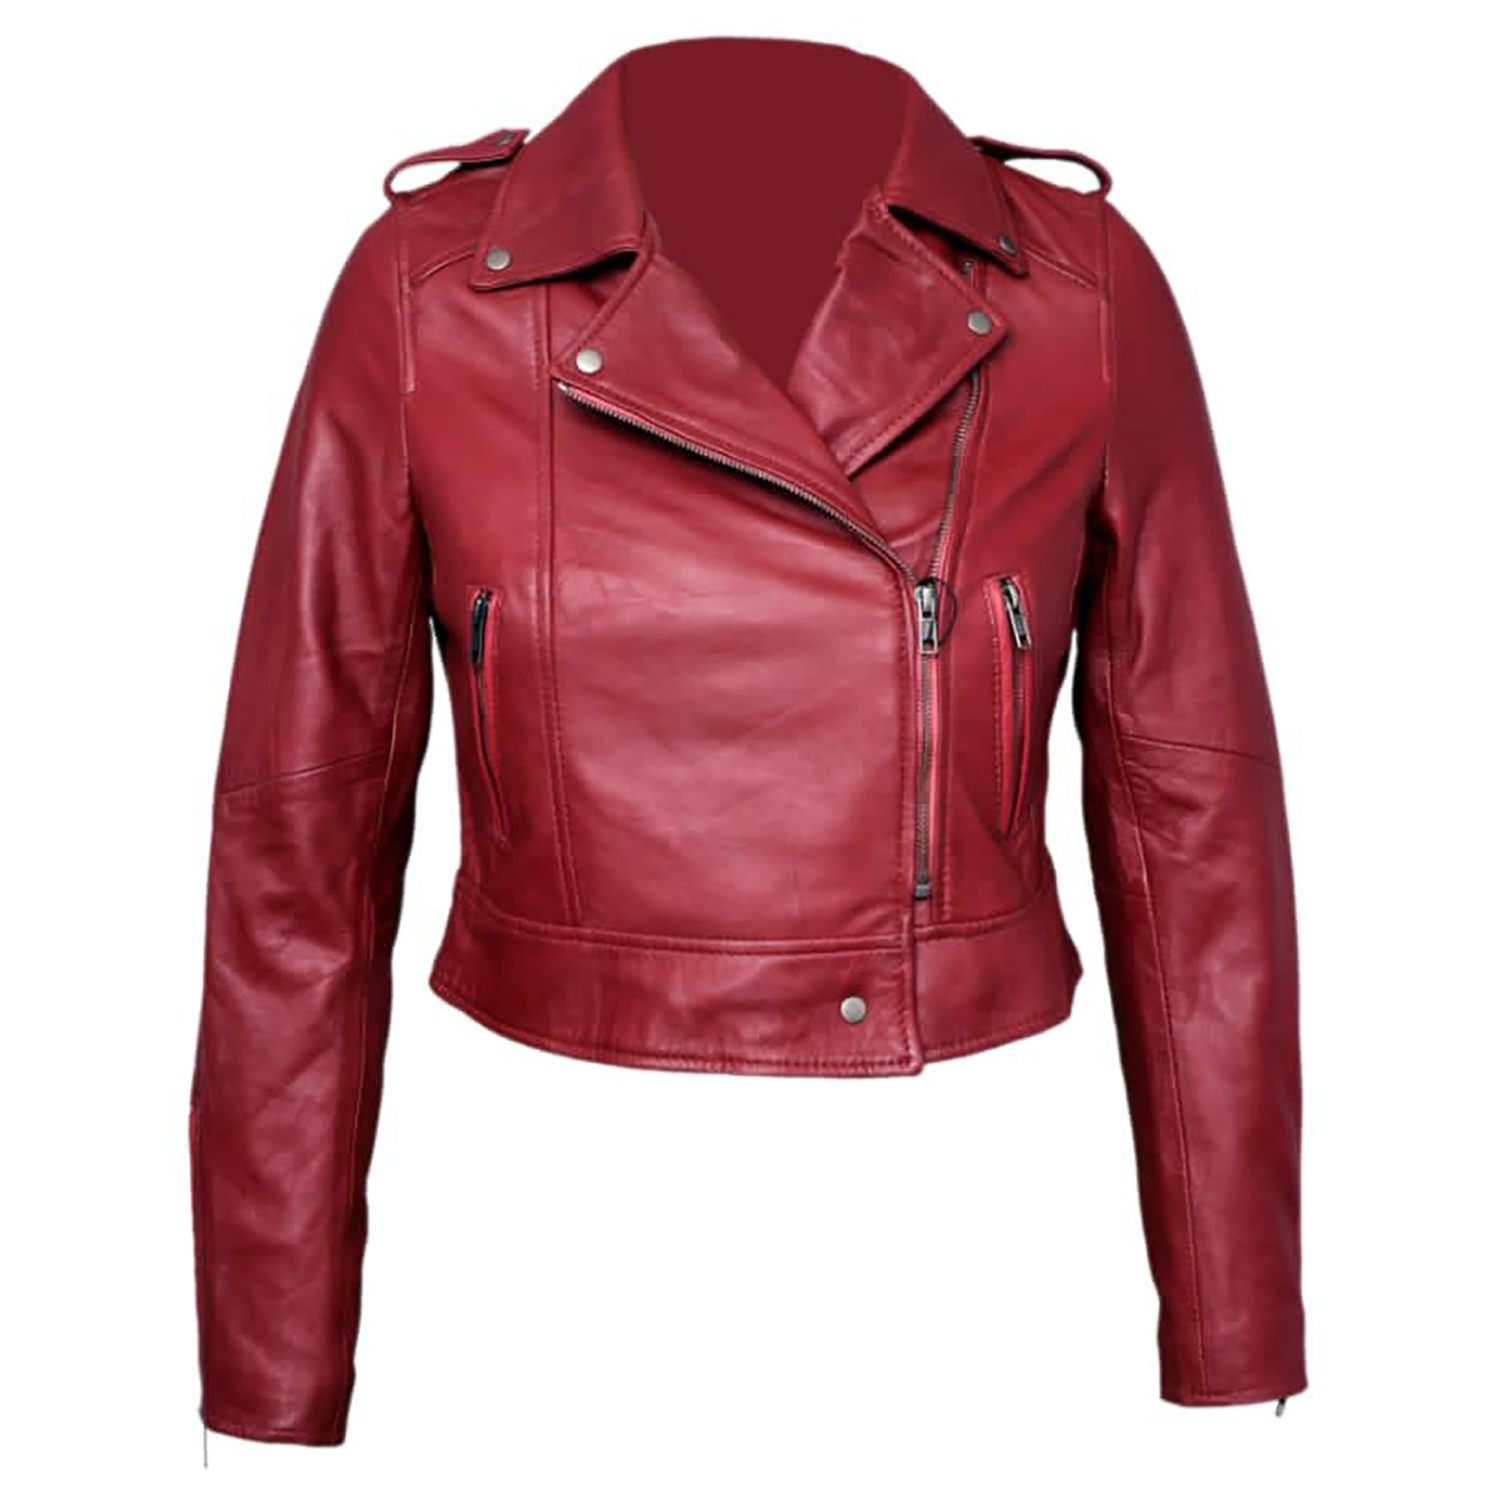 High-quality women’s leather jacket red genuine leather biker jacket high-quality material ladies jacket